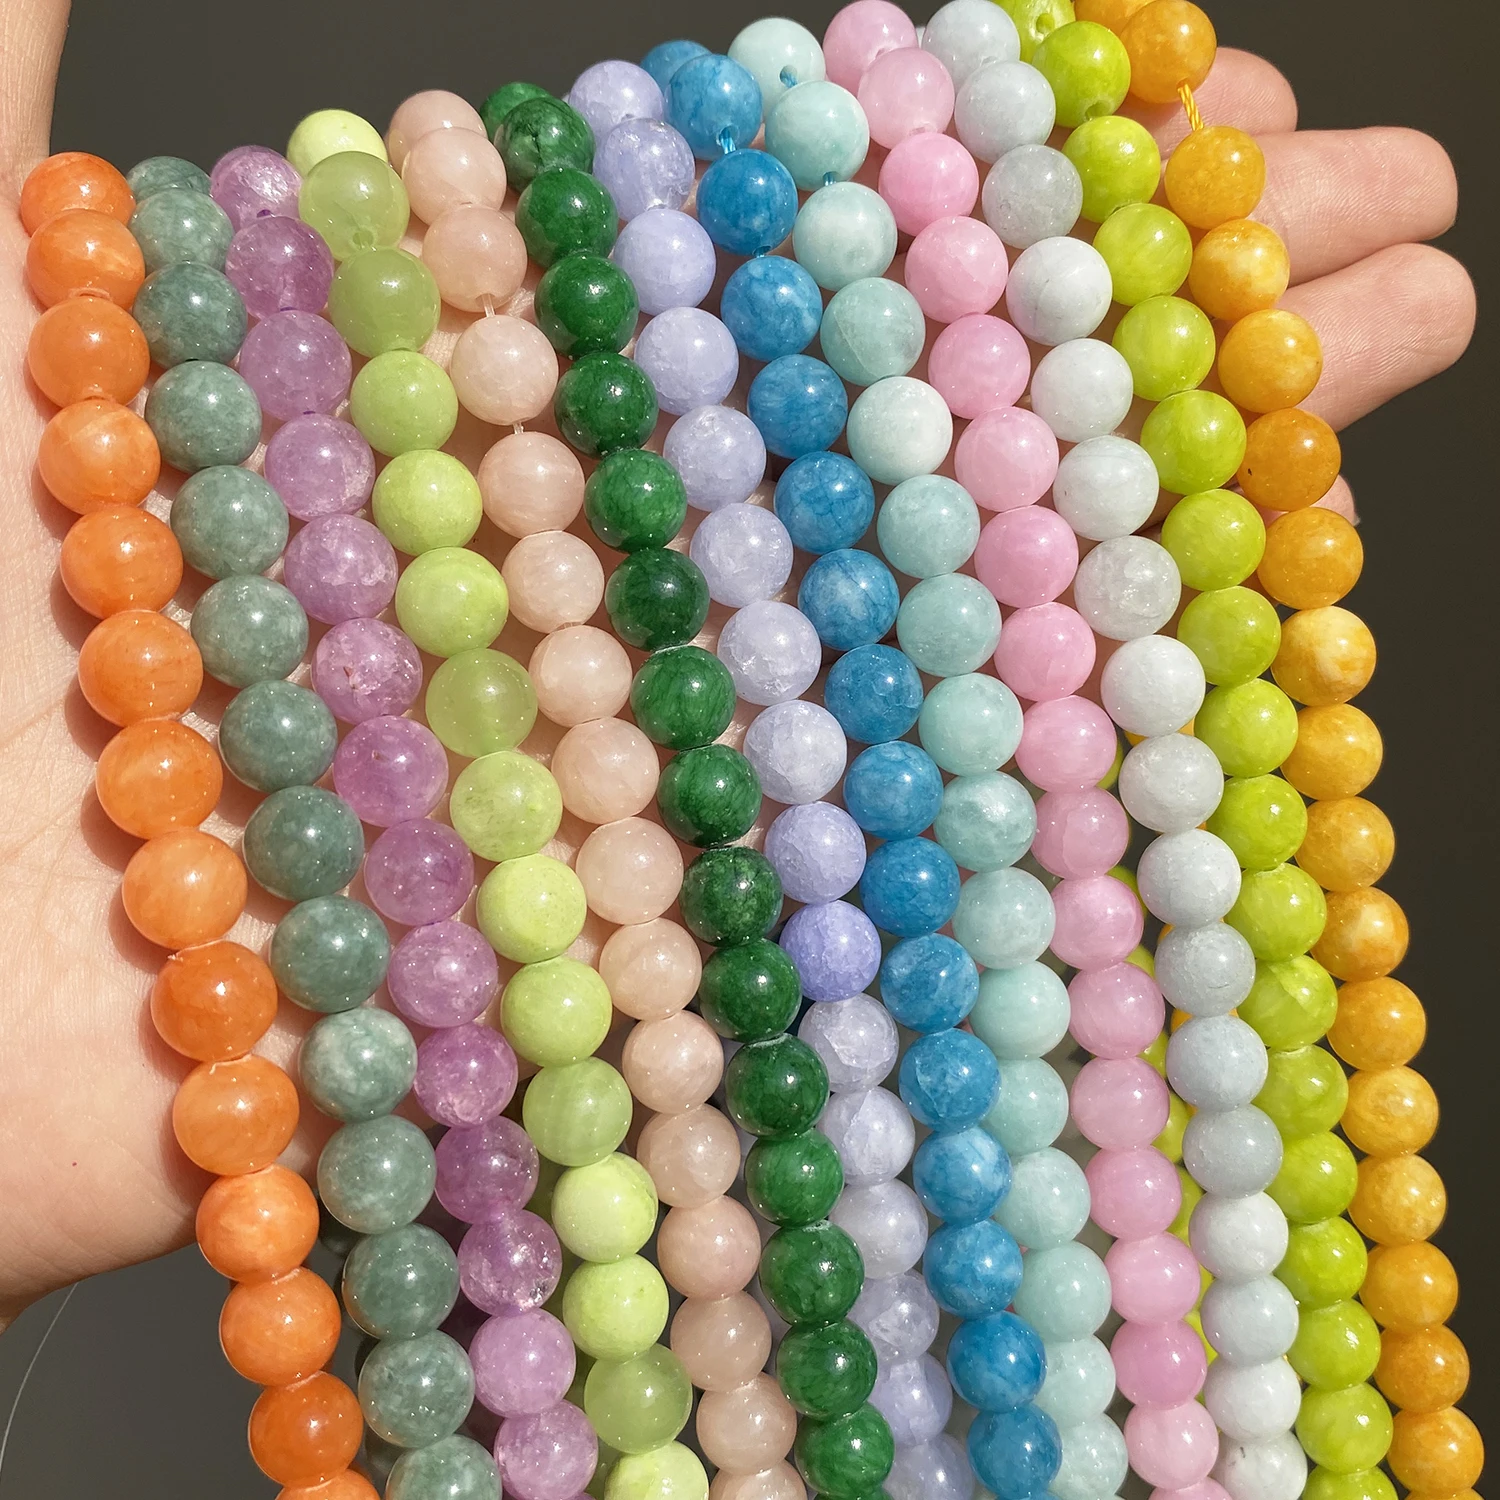 

4-12mm Natural Jades Chalcedony Angelite Stone Beads Round Loose Spacer Beads for Jewelry Making DIY Necklace Bracelet 15inch